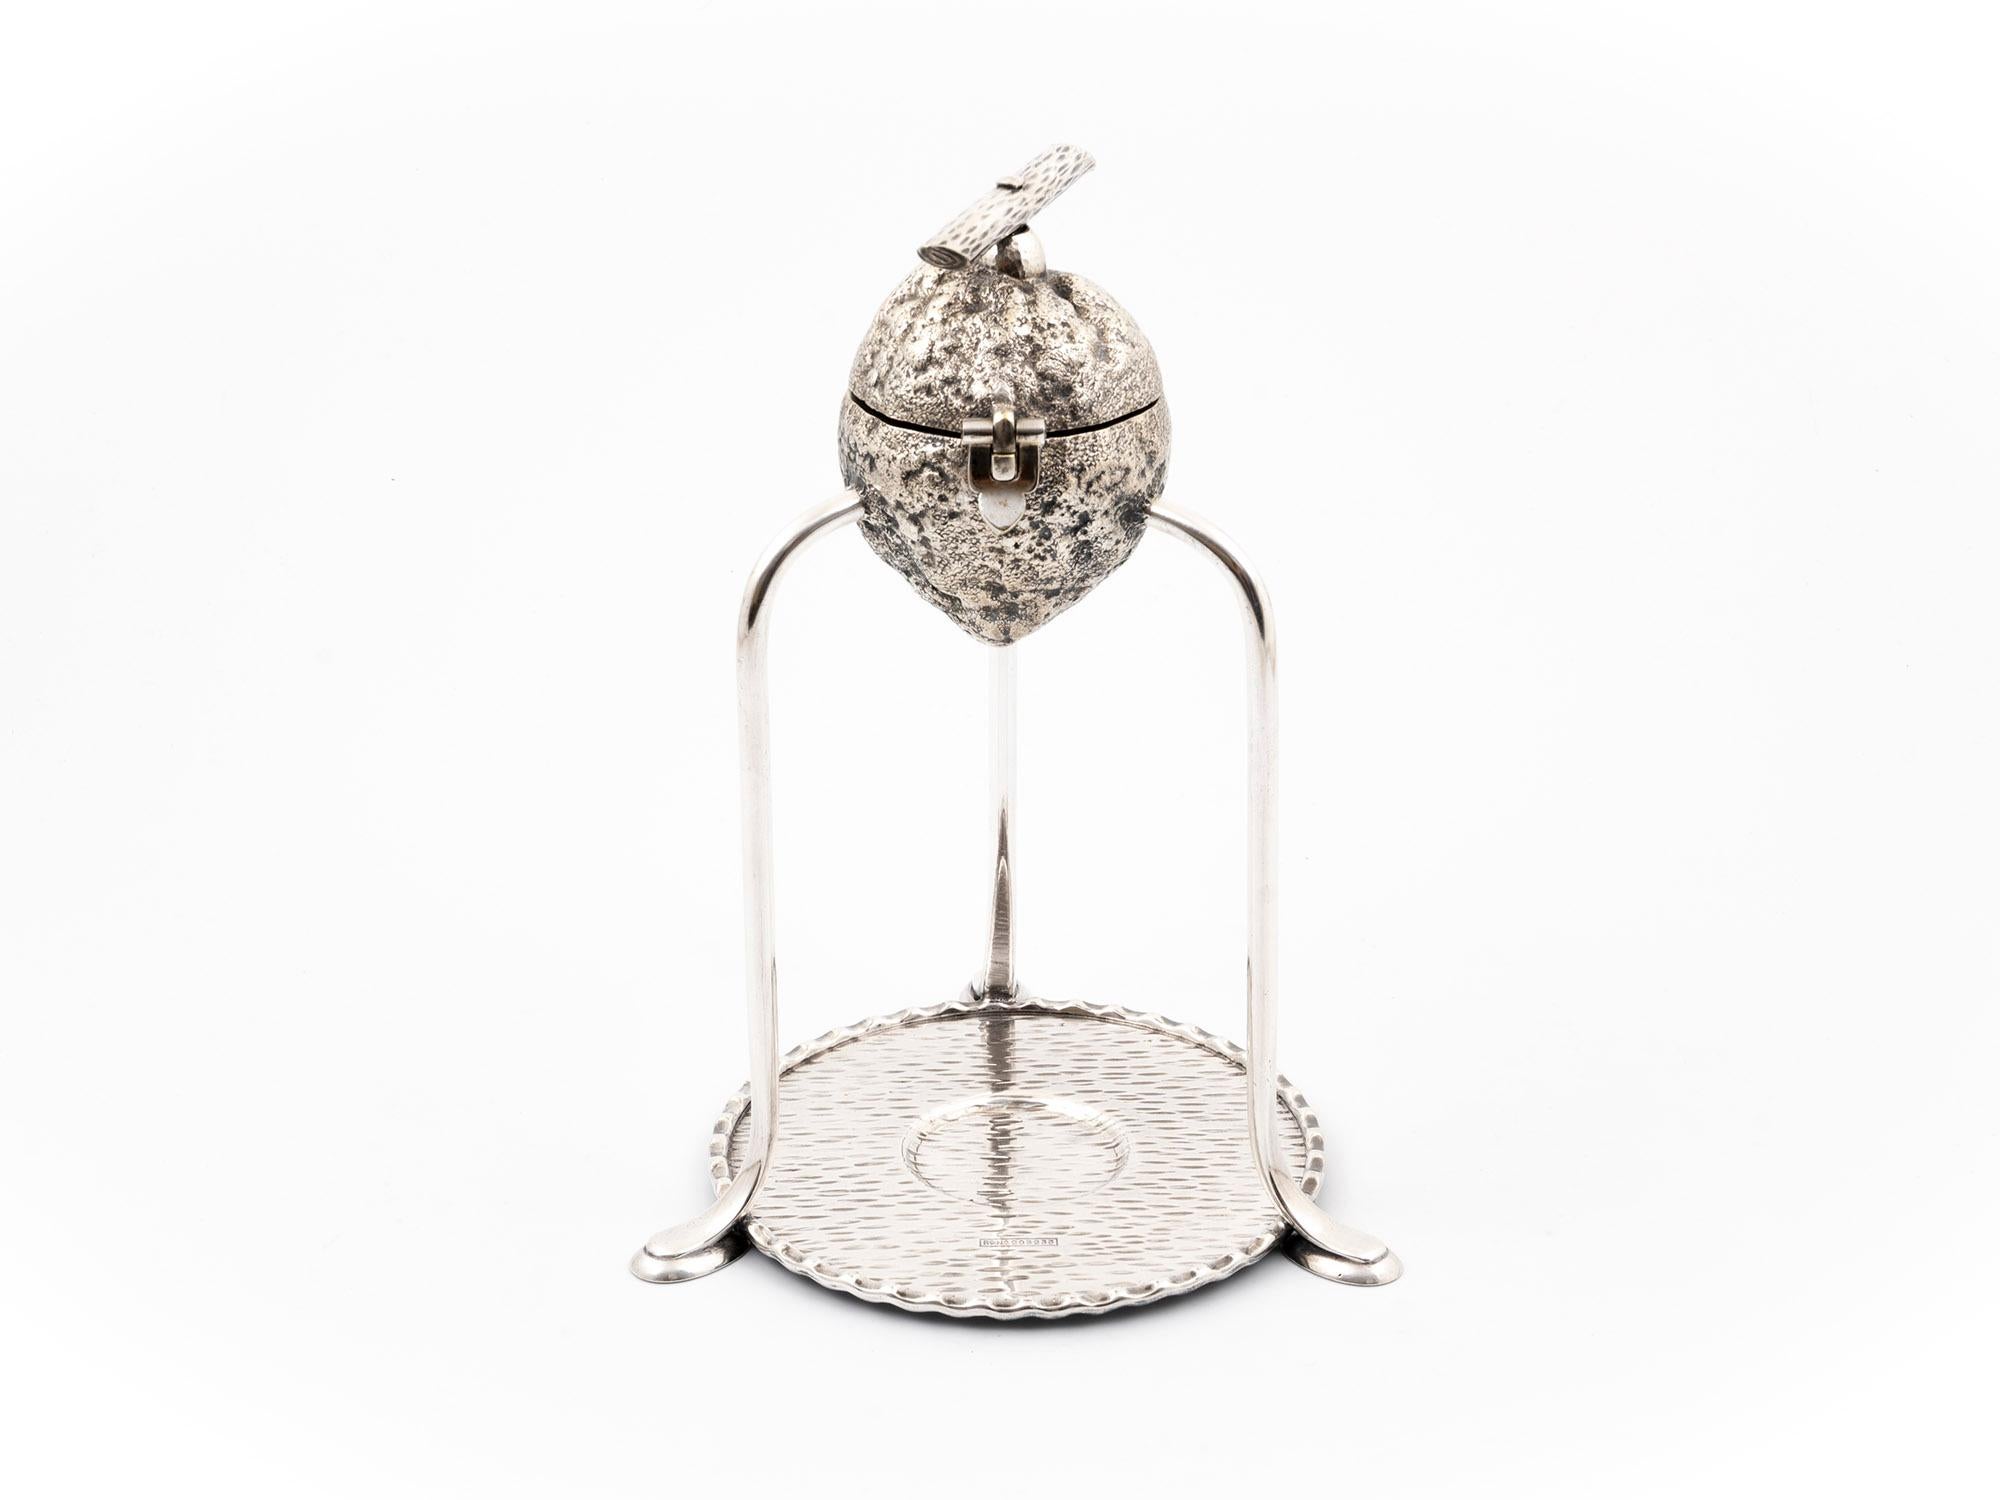 Silver-plated Hukin & Heath fruit squeezer. The squeezer has a turned wooden press with a screw handle in the style of a tree branch.

The body of the fruit squeezer has a registered design number: 203233. This number can also be found on the base